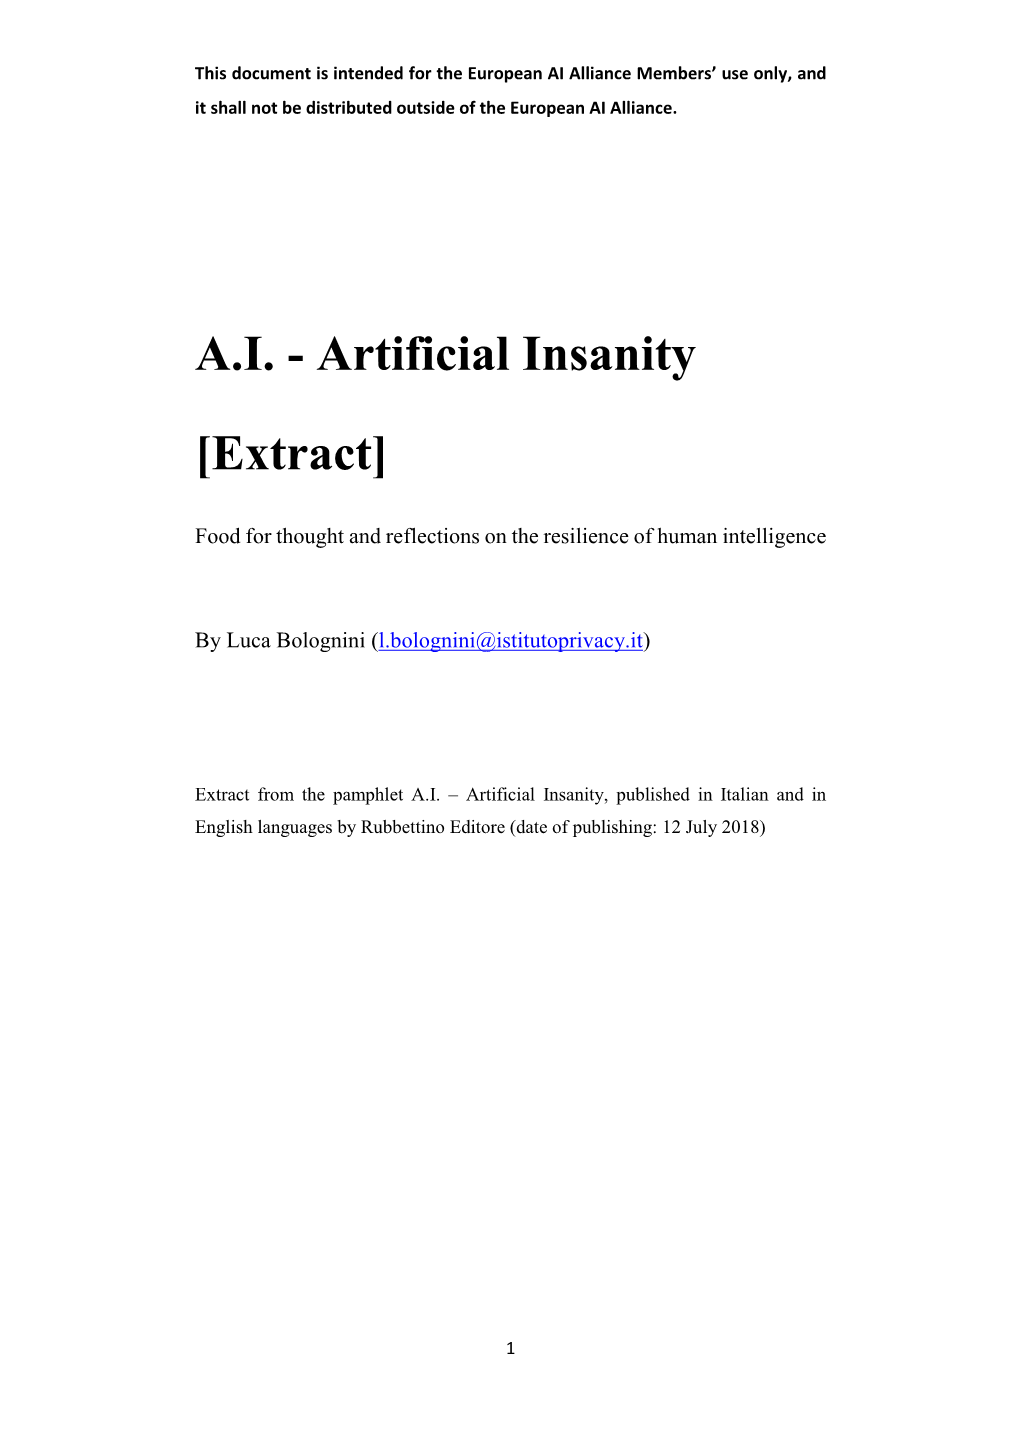 Artificial Insanity [Extract]